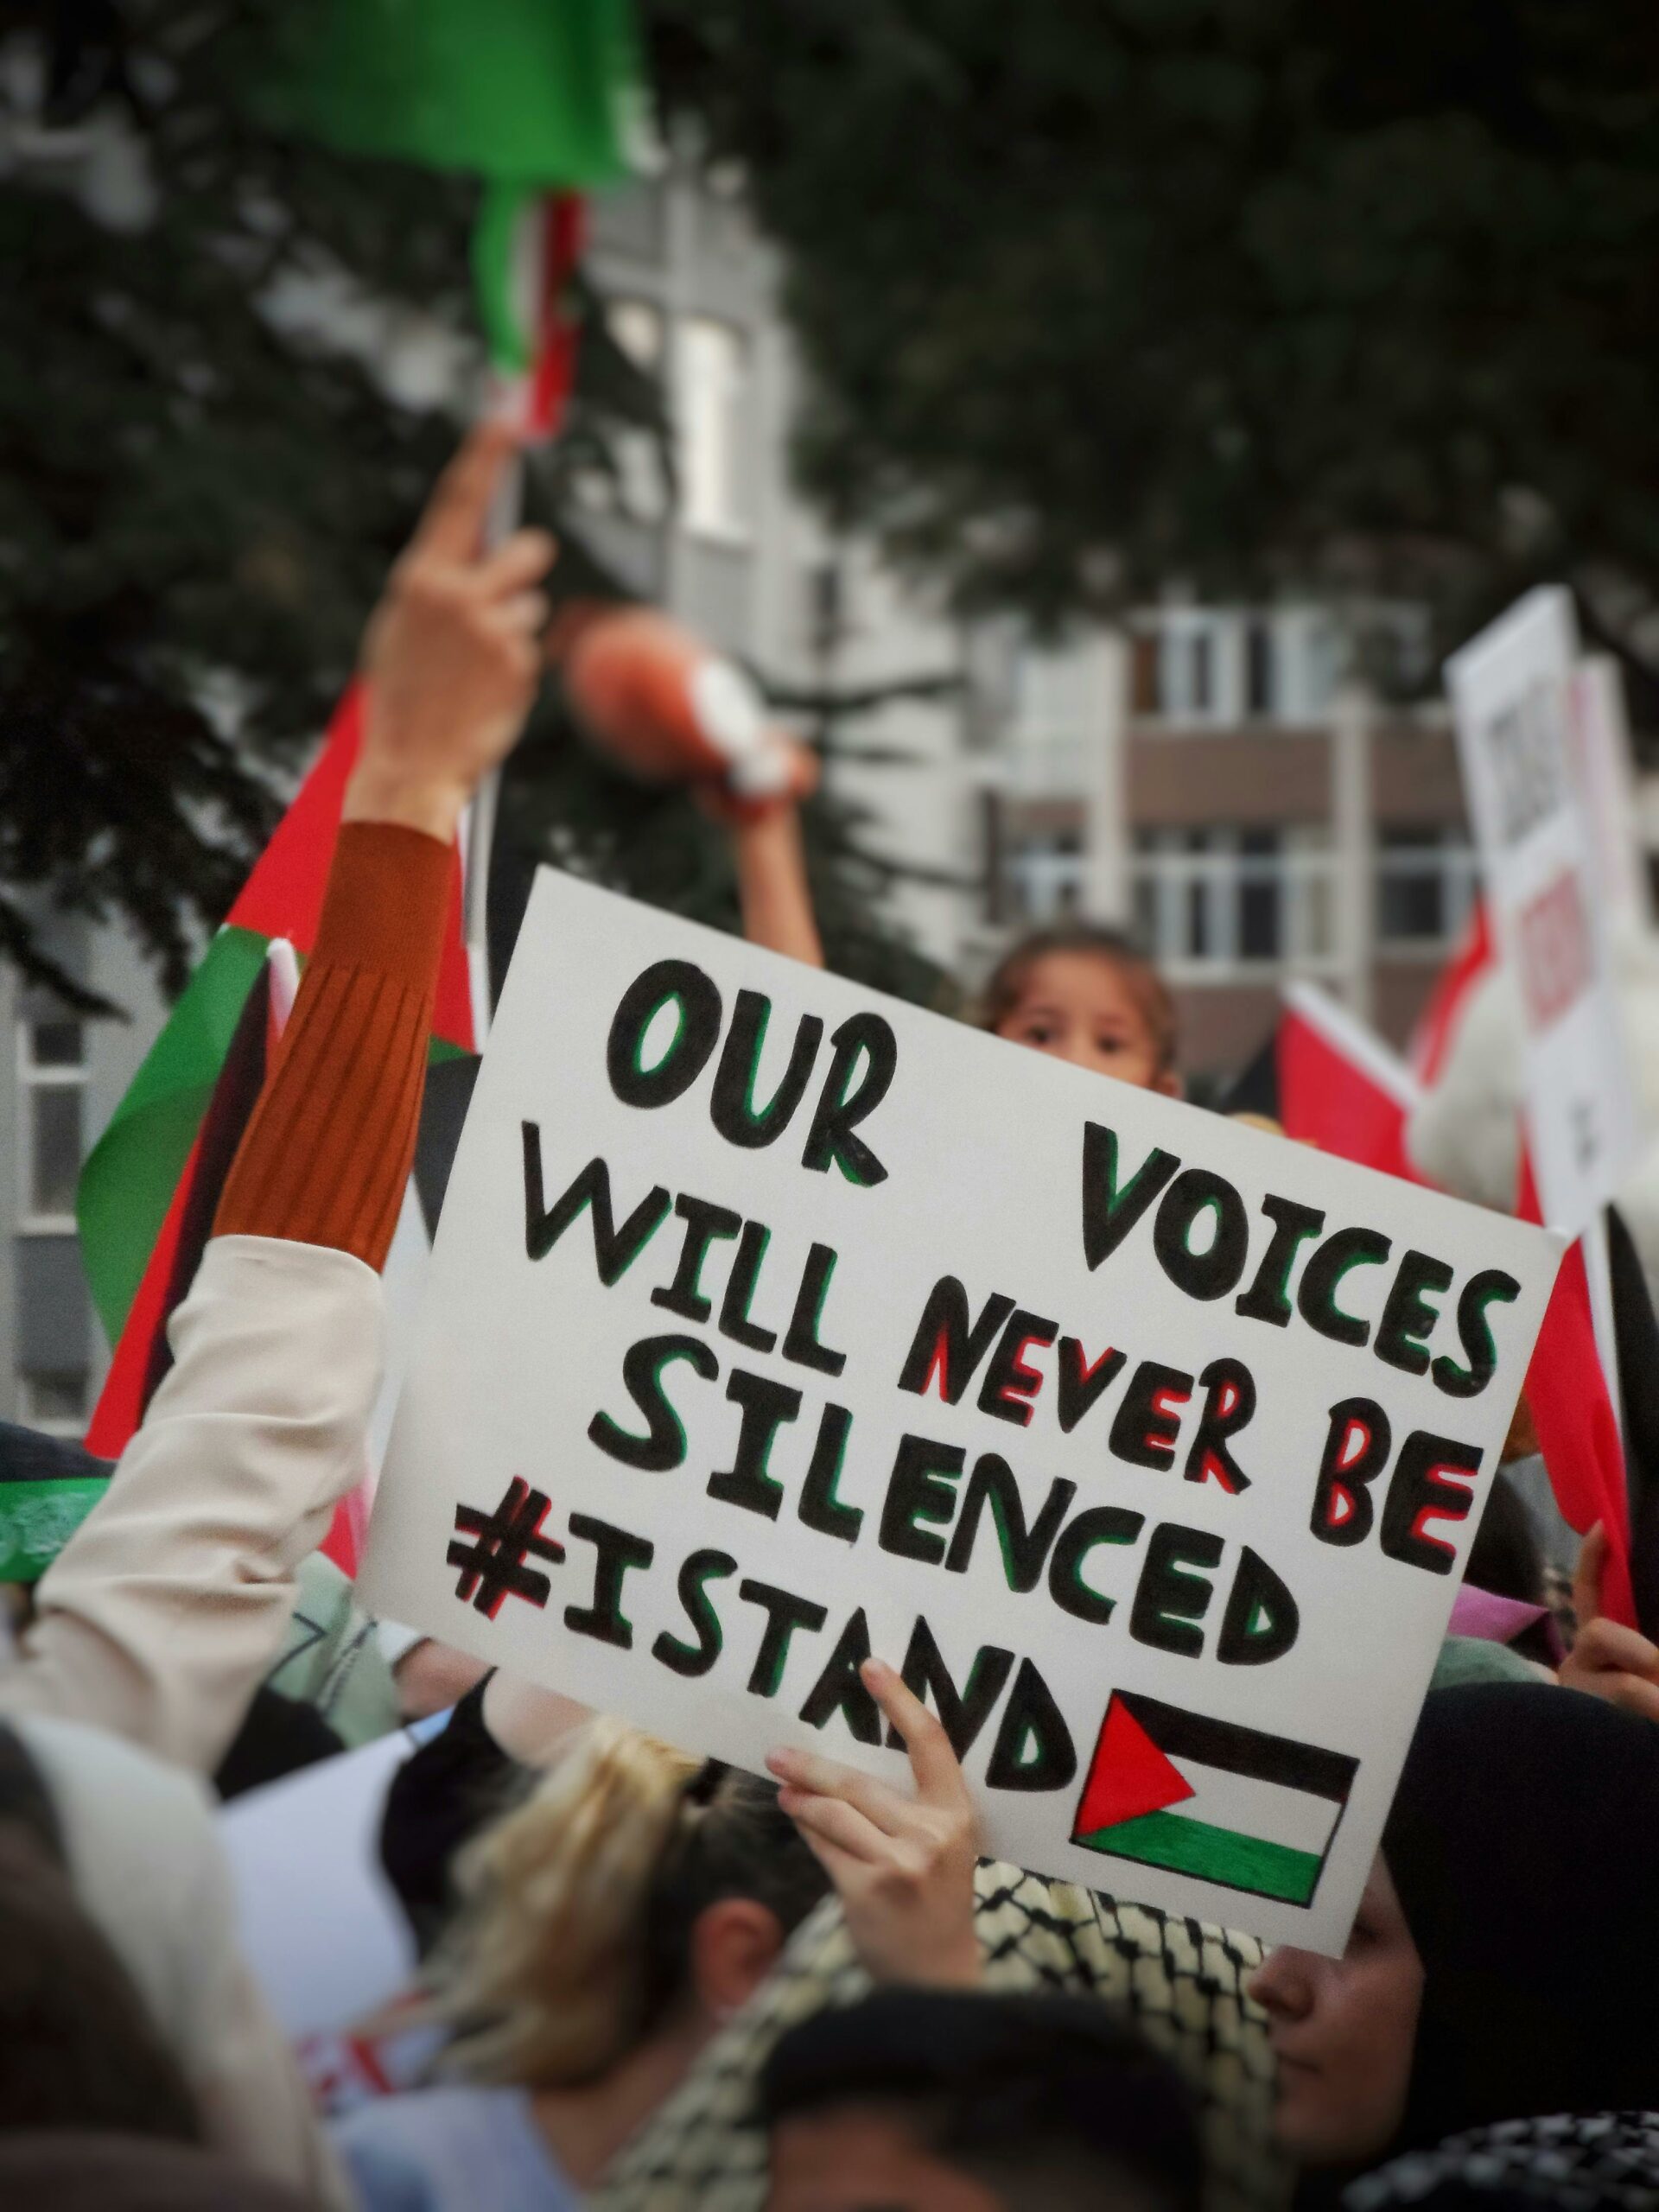 a sign is held up in the middle of a protest, reading “our voices will never be silenced” with an image of the Palestinian flag.